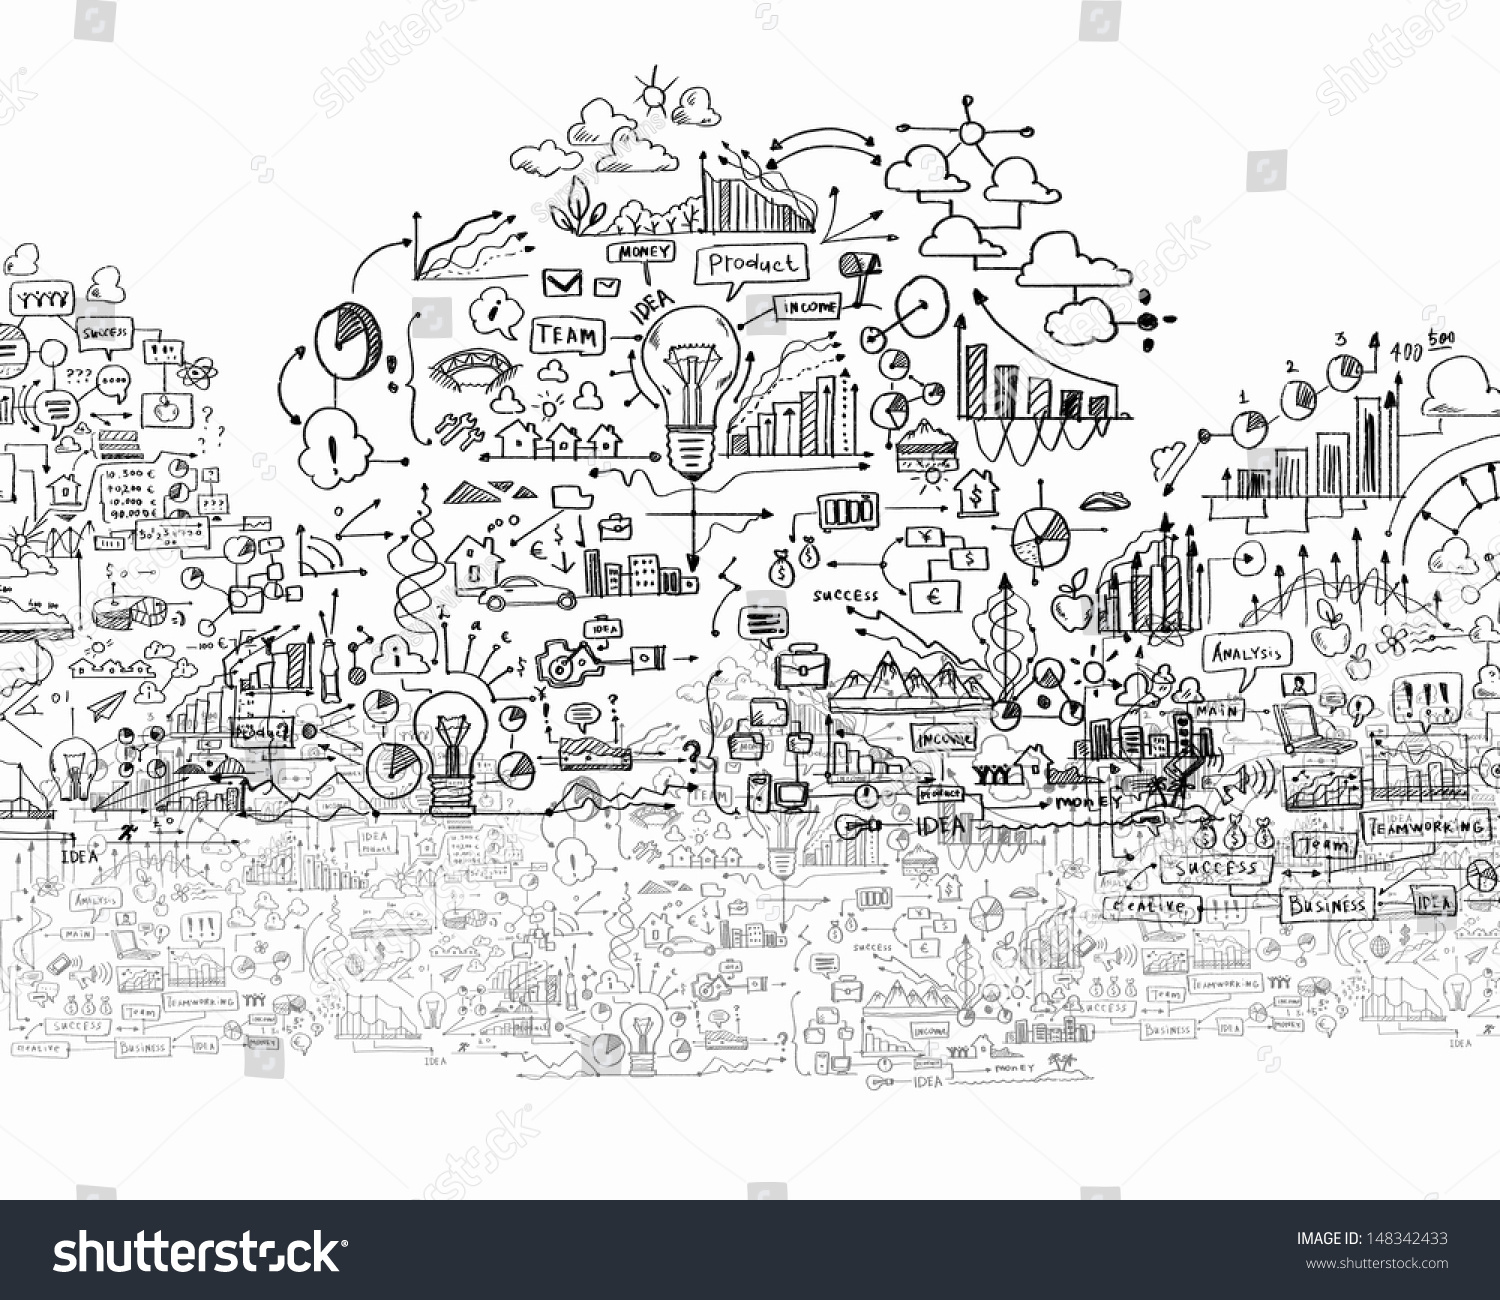 Hand drawn business ideas sketch against white background #148342433